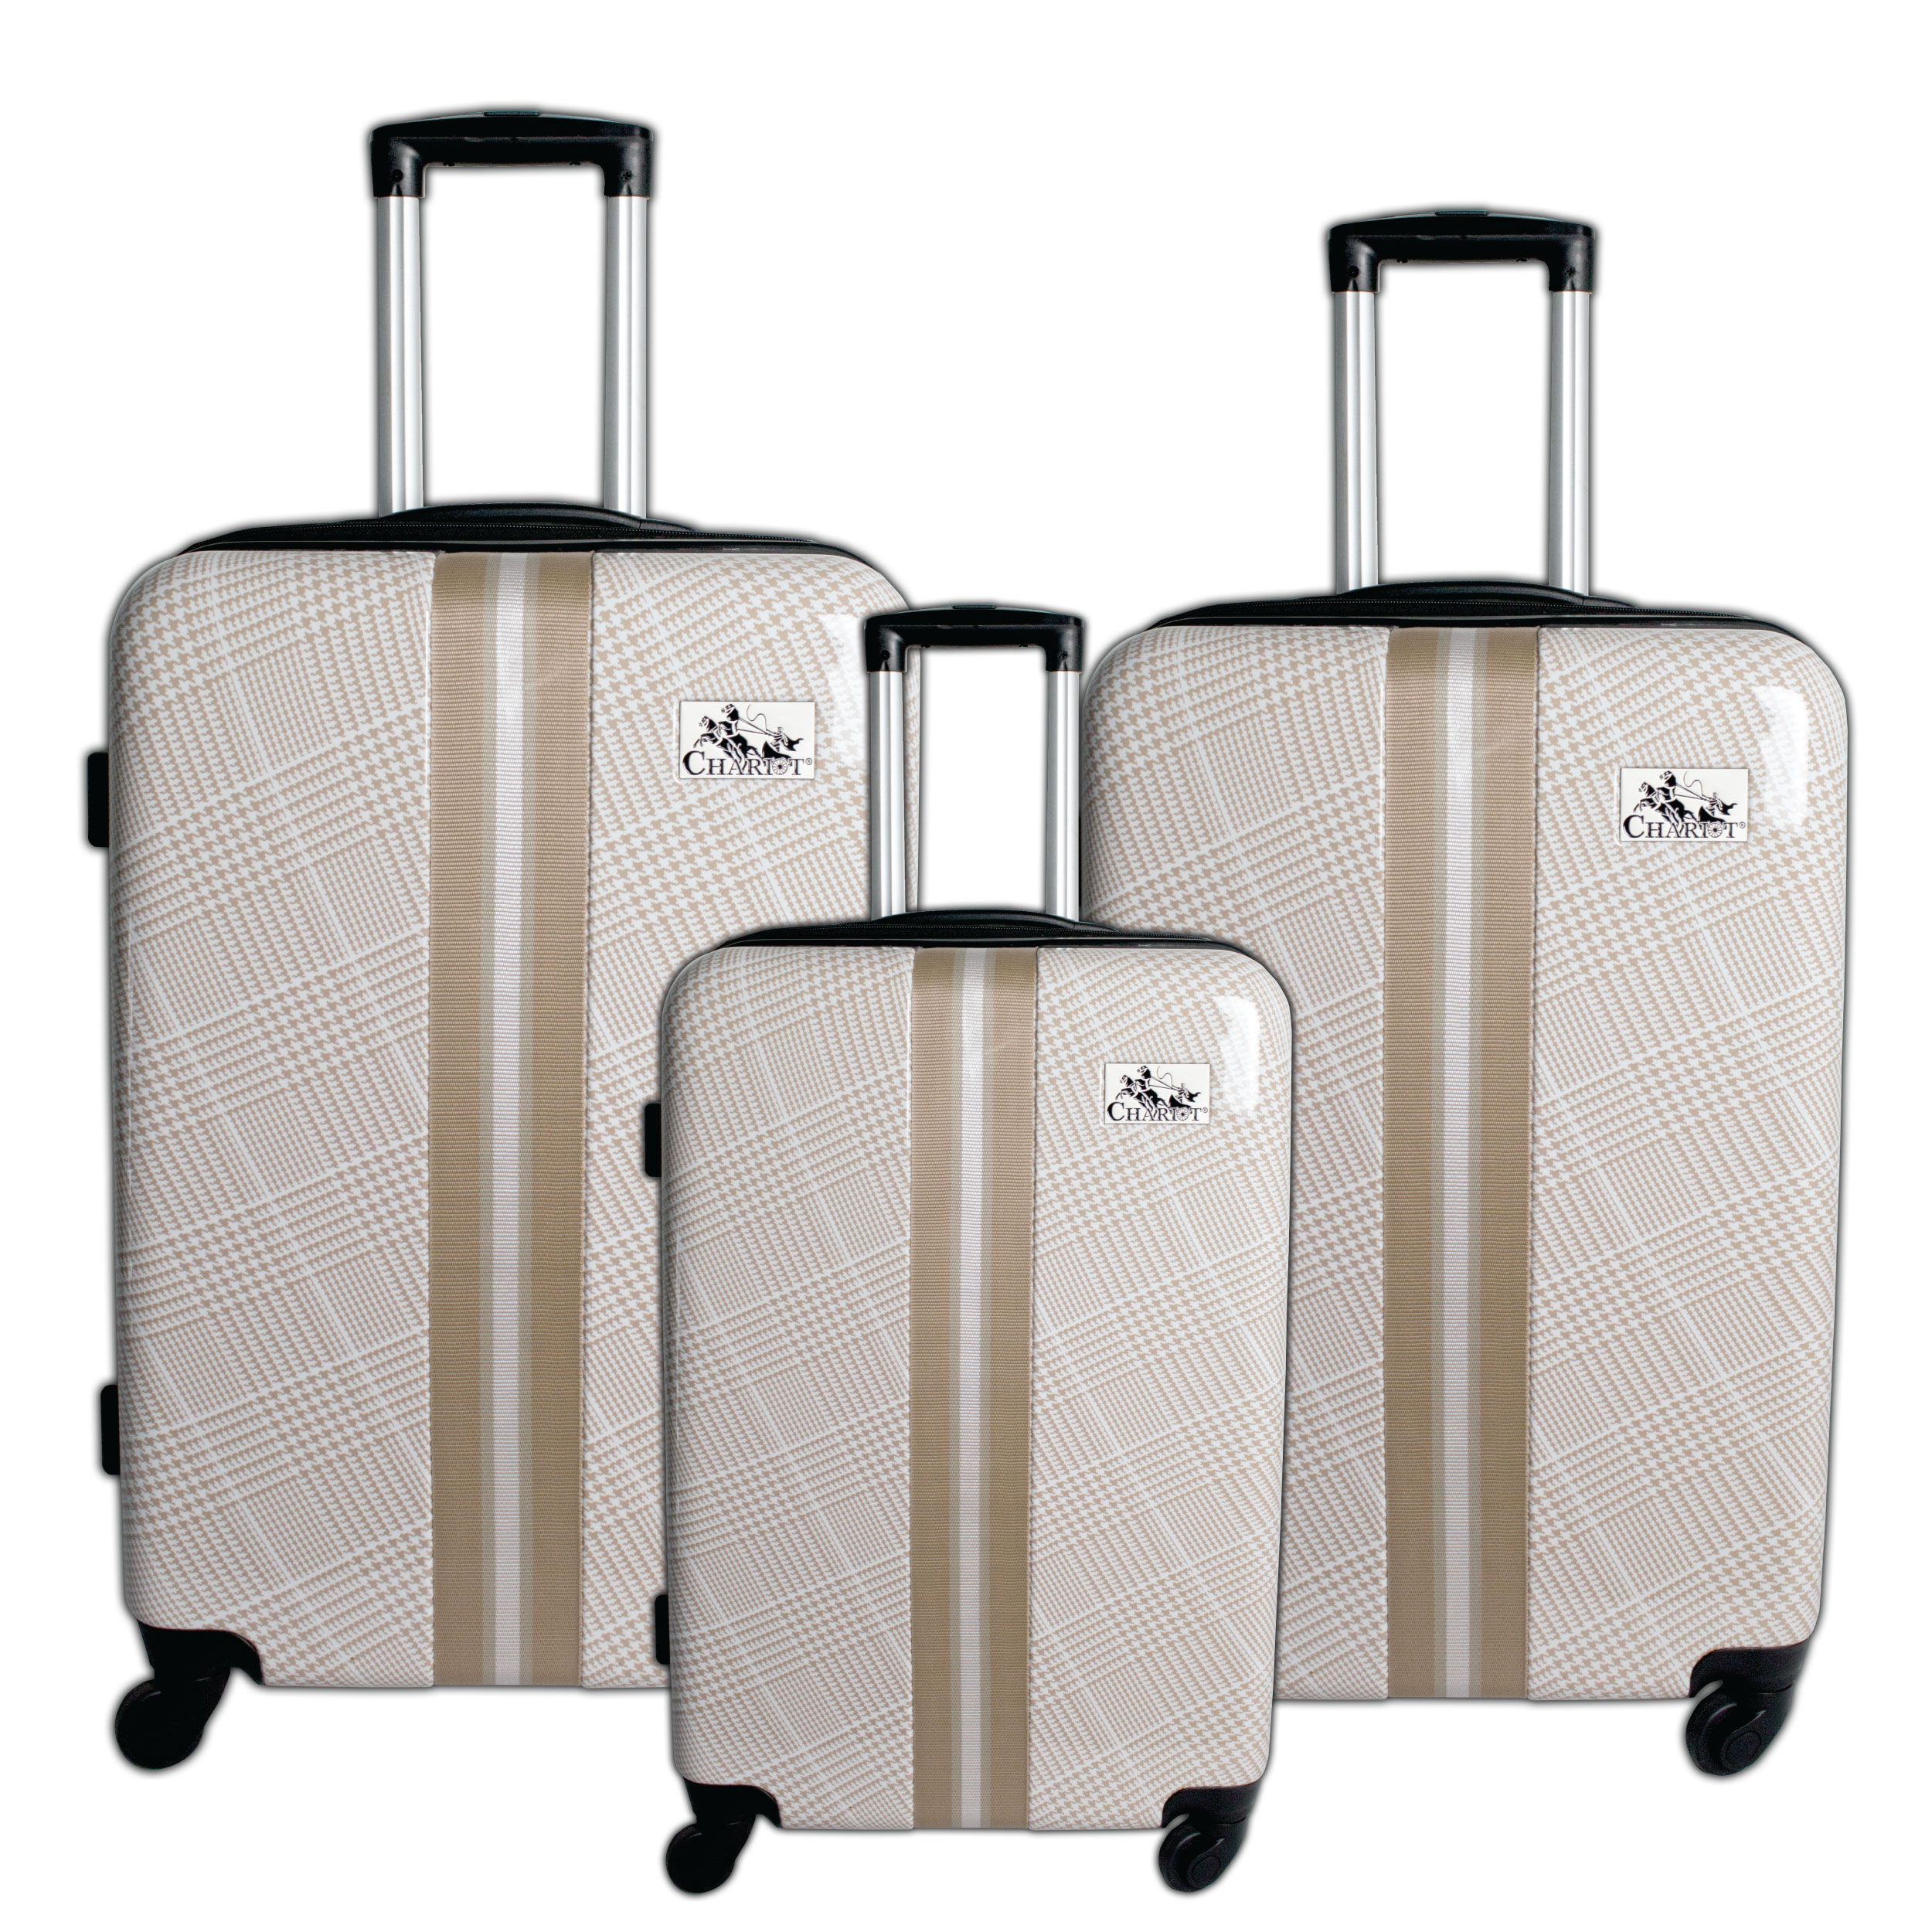 Chariot Travelware Titanic 20'' Carry On Hardside Spinner Luggage 